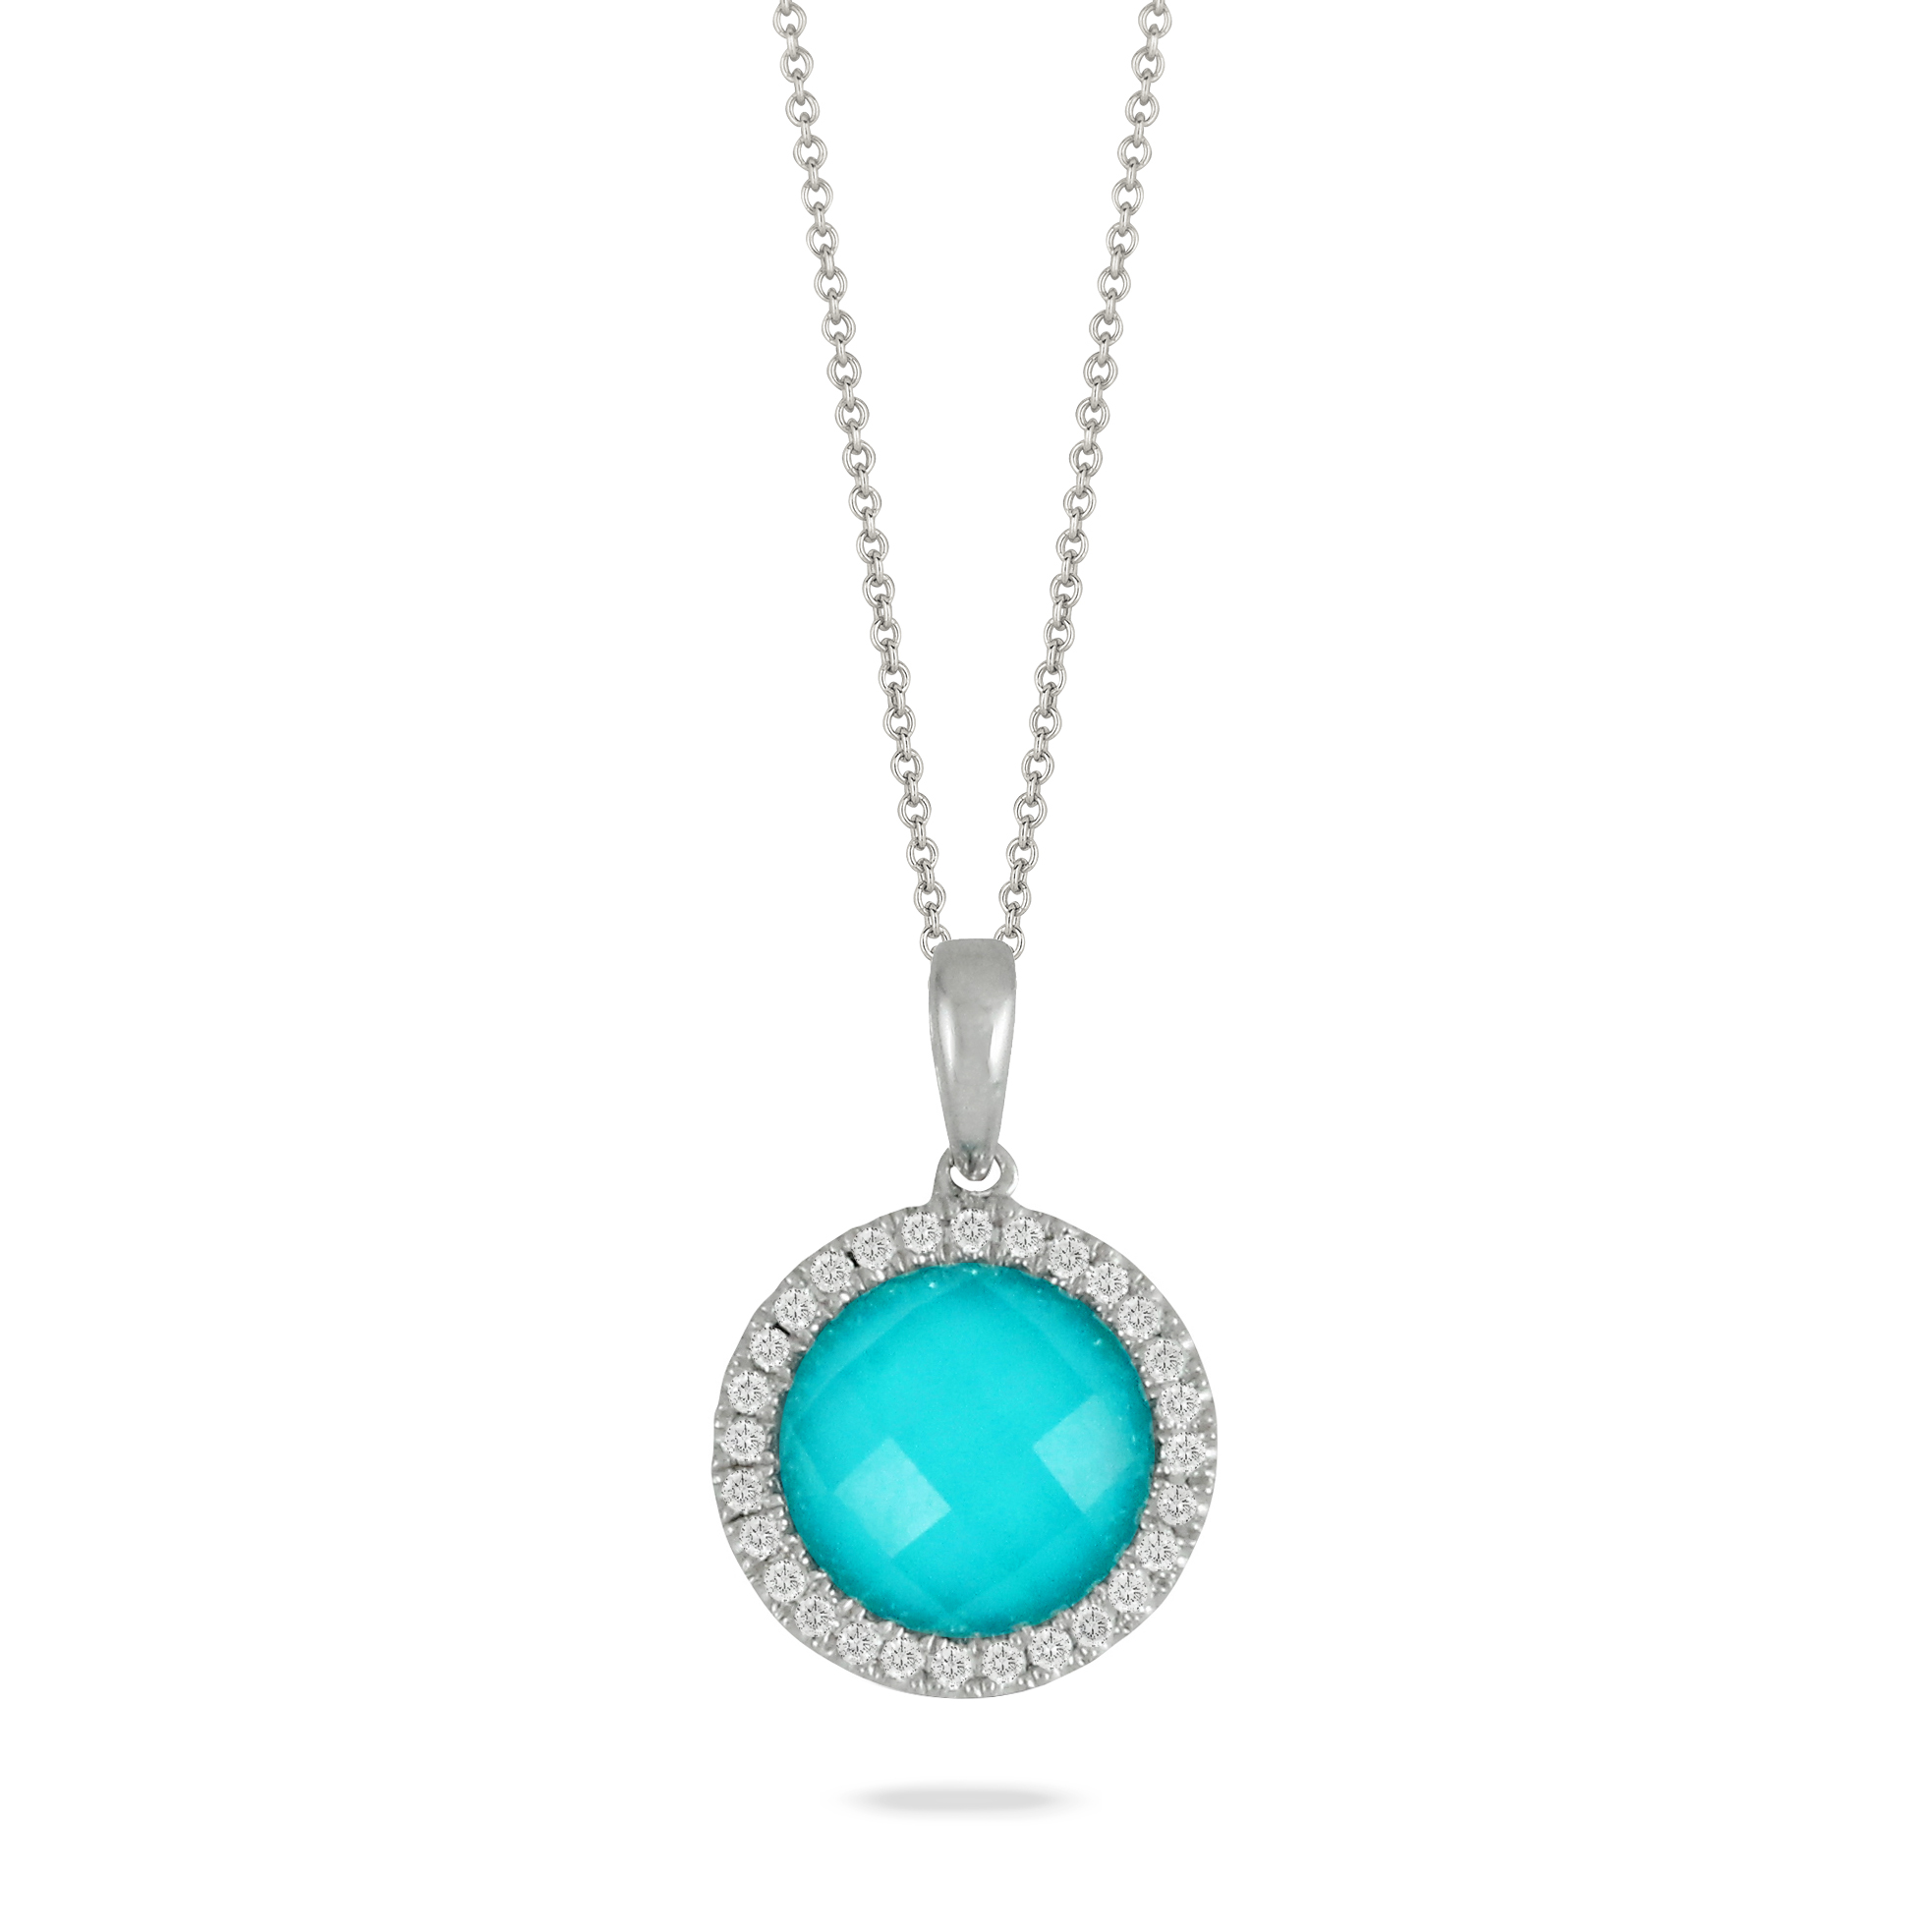 18K White Gold Turquoise Pendant by Dove